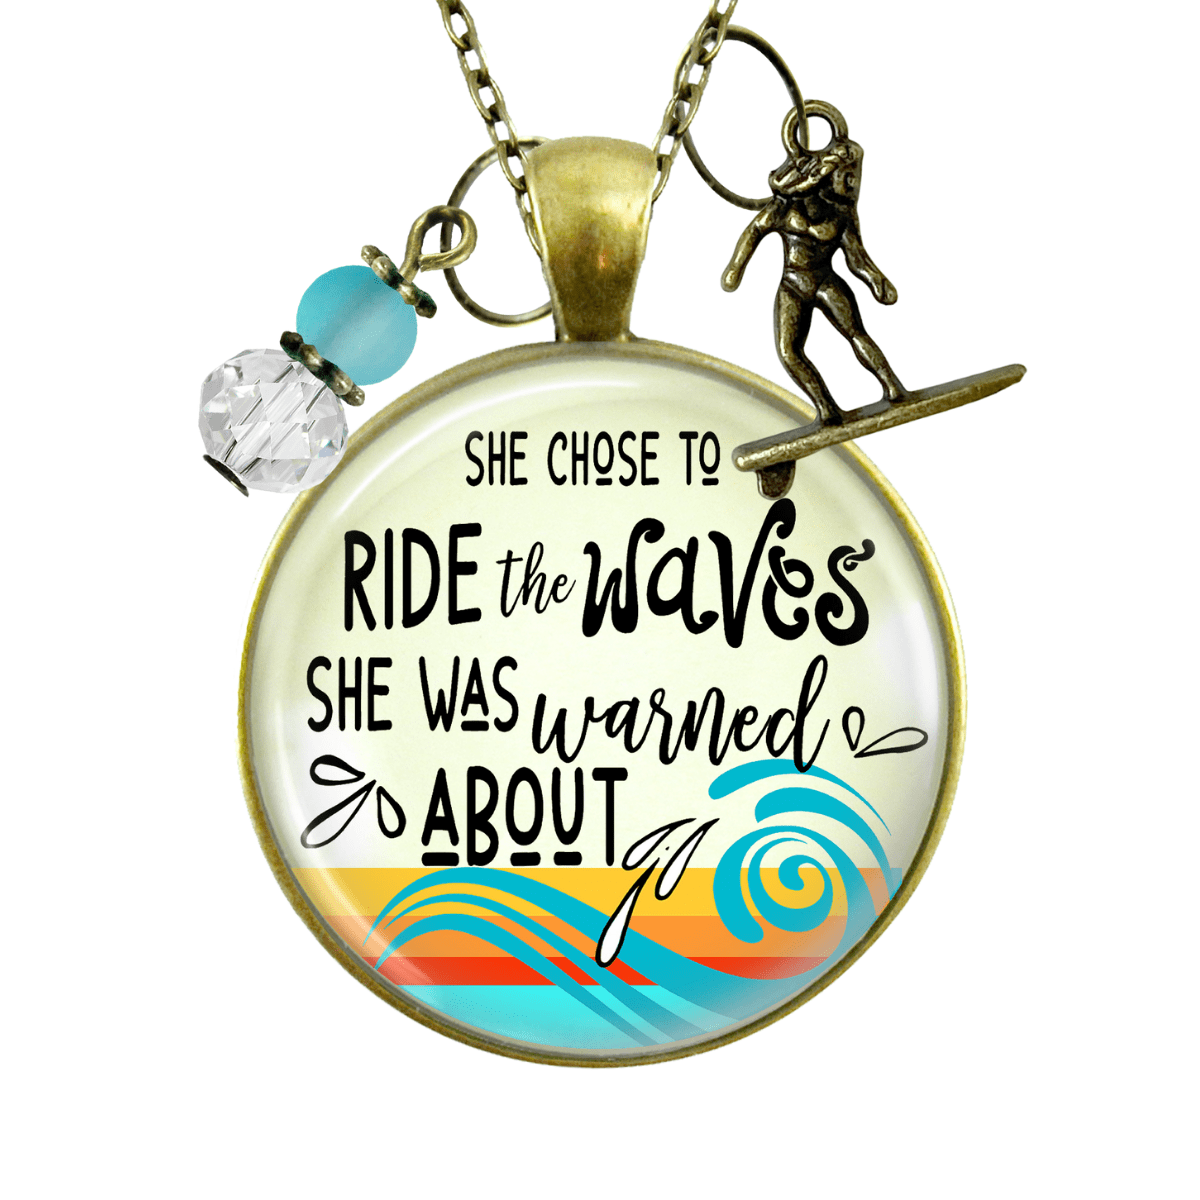 Surfer Girl Necklace She Rides Waves They Warn Her About Motivation Life Mantra Sea Glass Style Charm  Necklace - Gutsy Goodness Handmade Jewelry